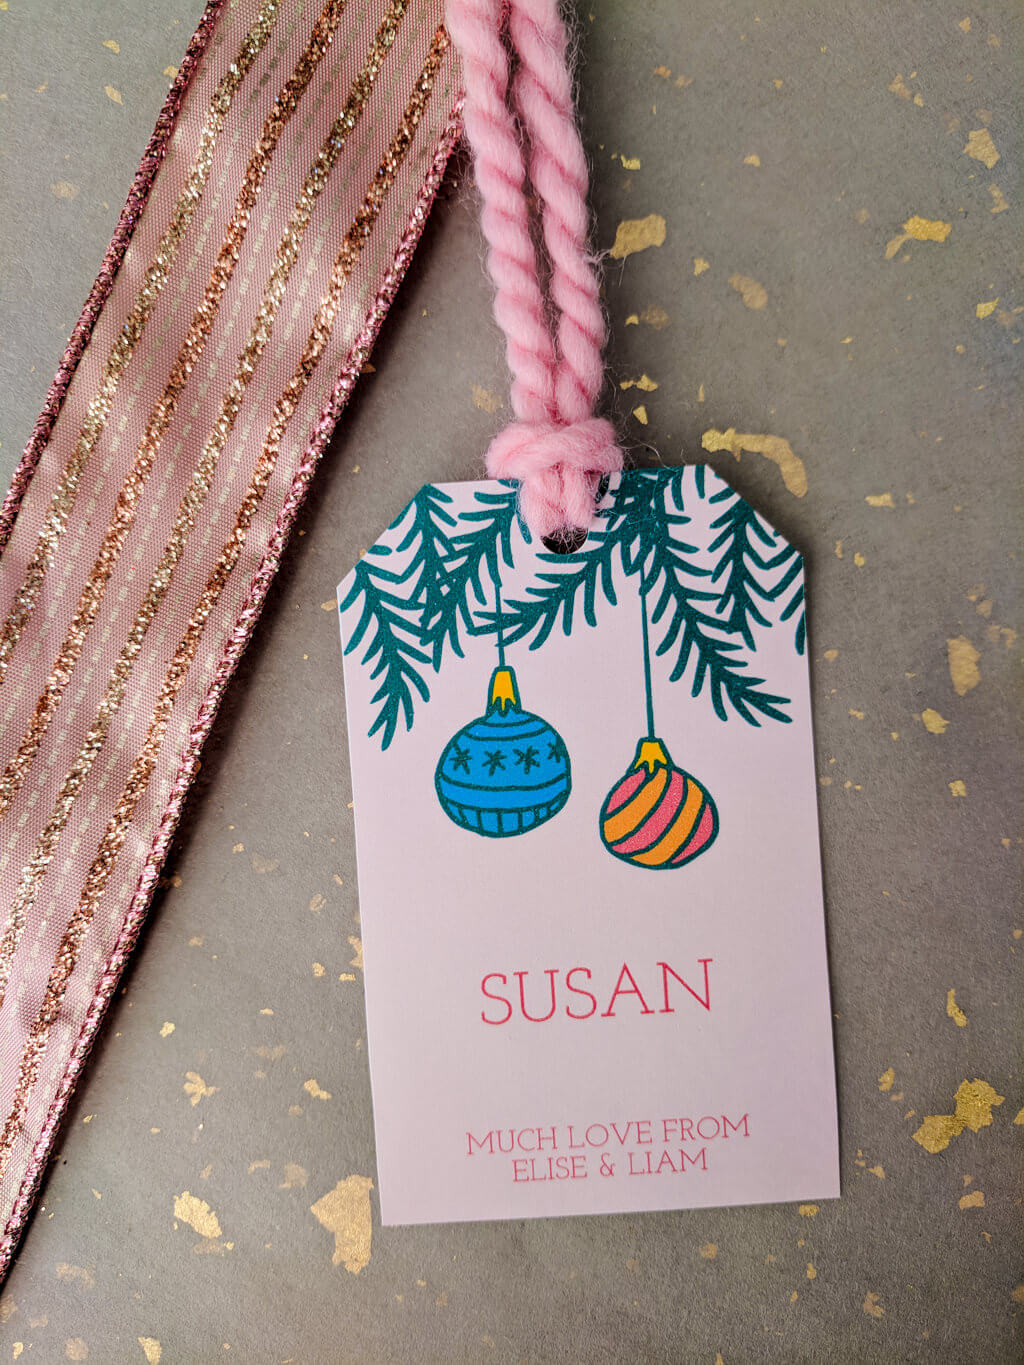 Free editable Christmas tags - in pink!